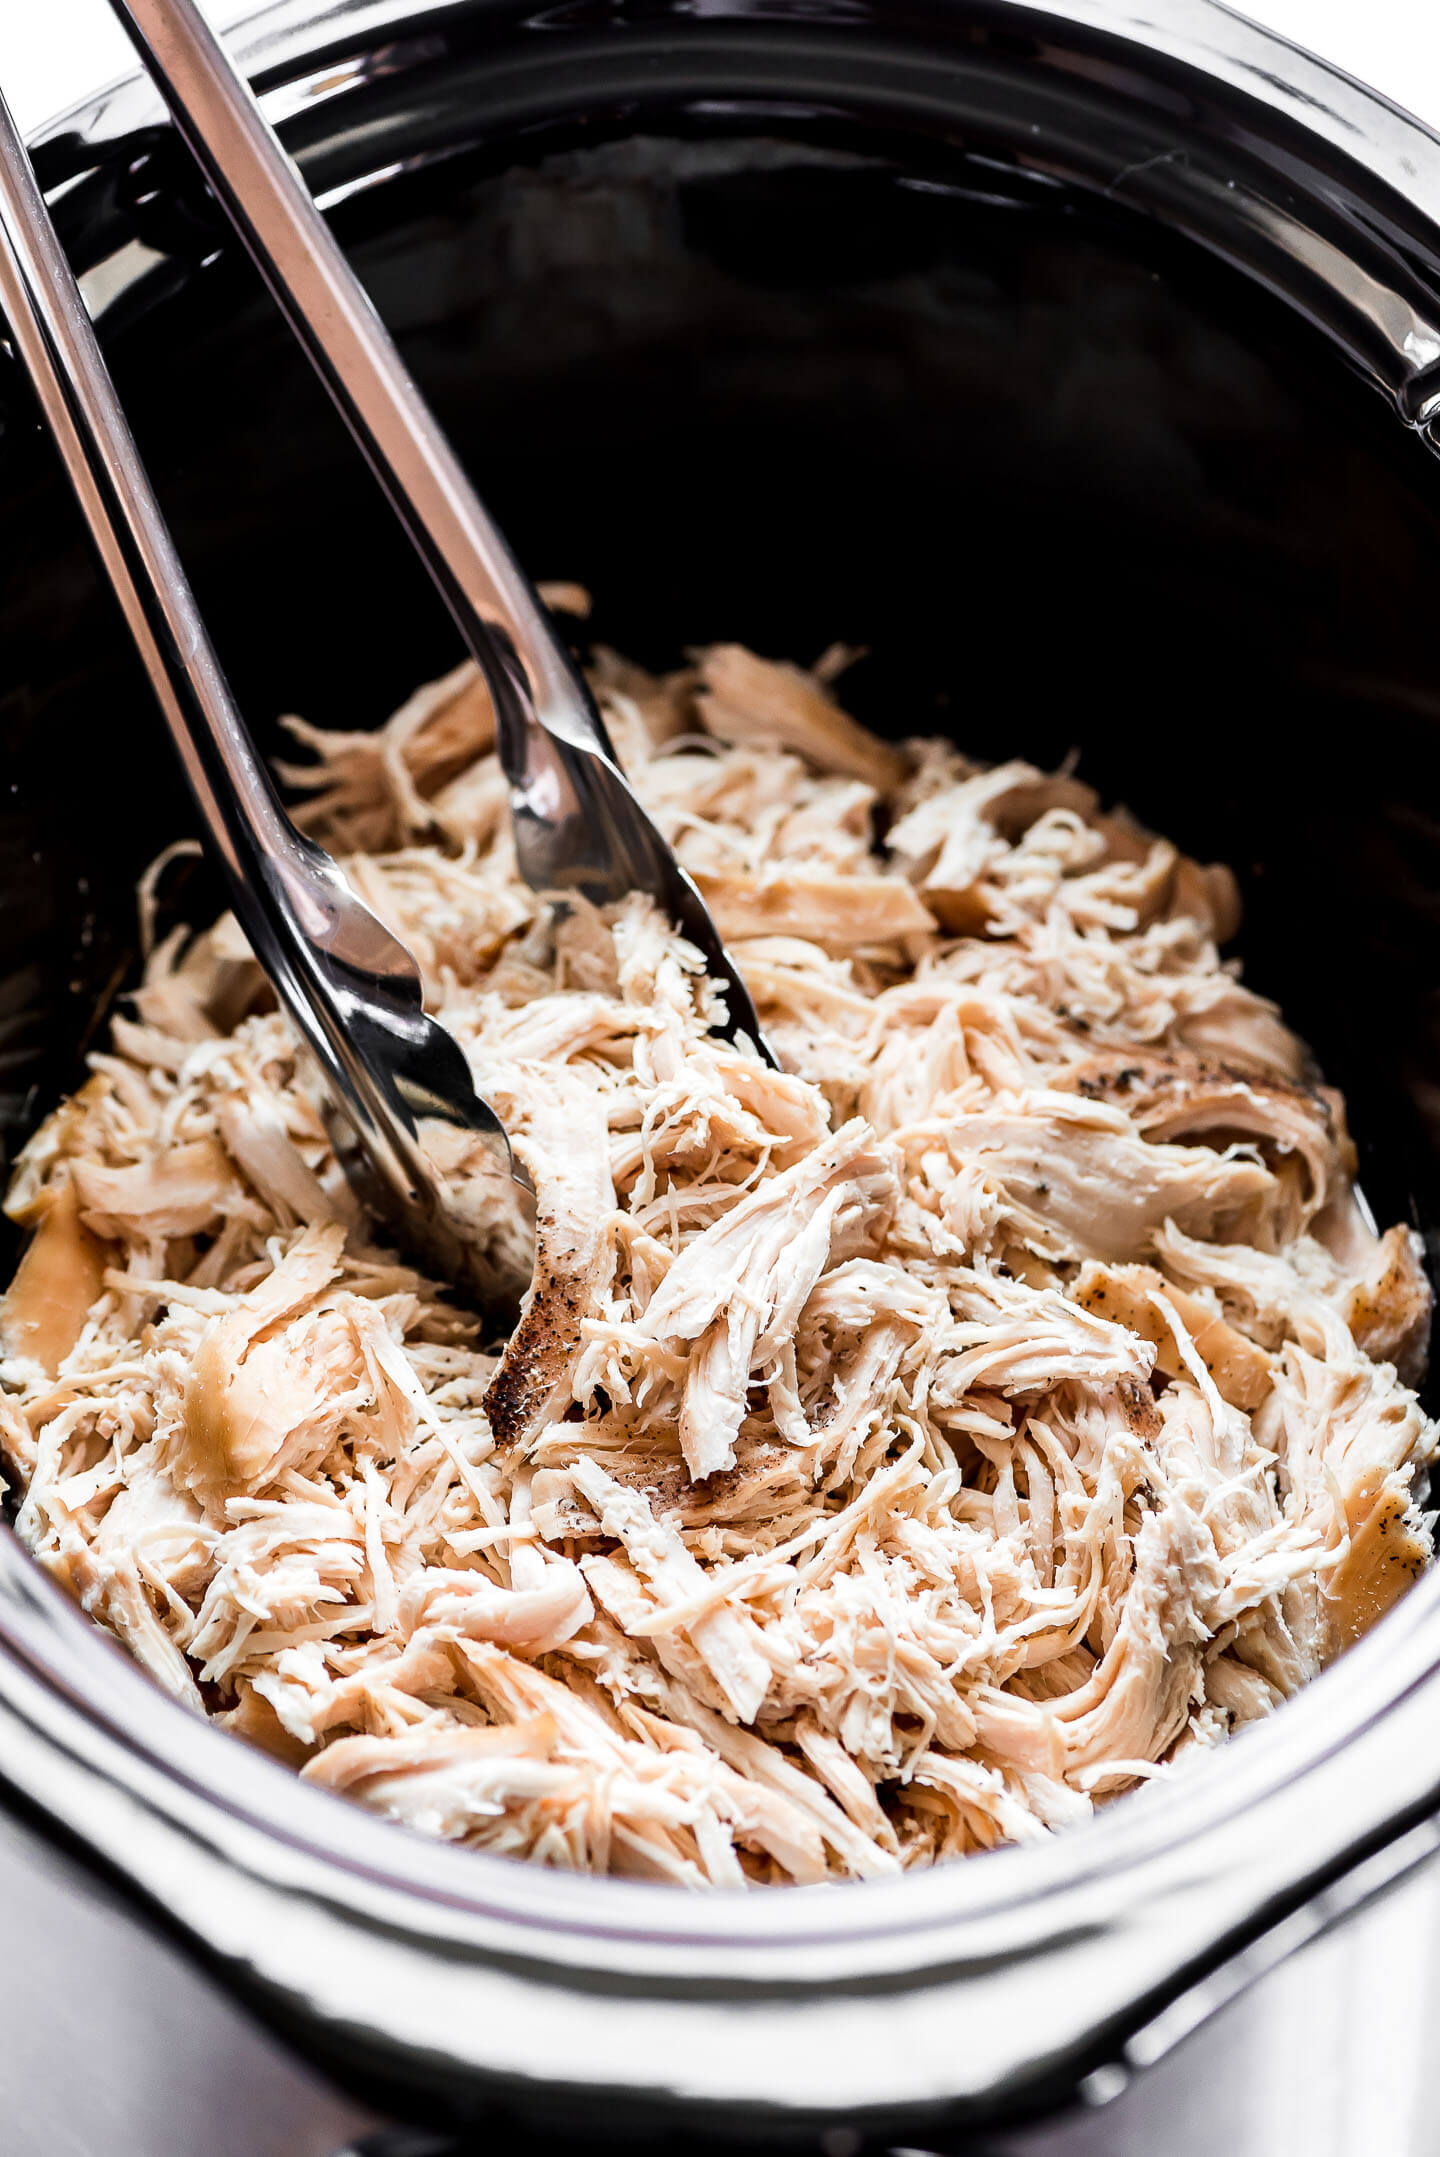 Shredded chicken in a Crock-Pot with tongs about to lift some out.